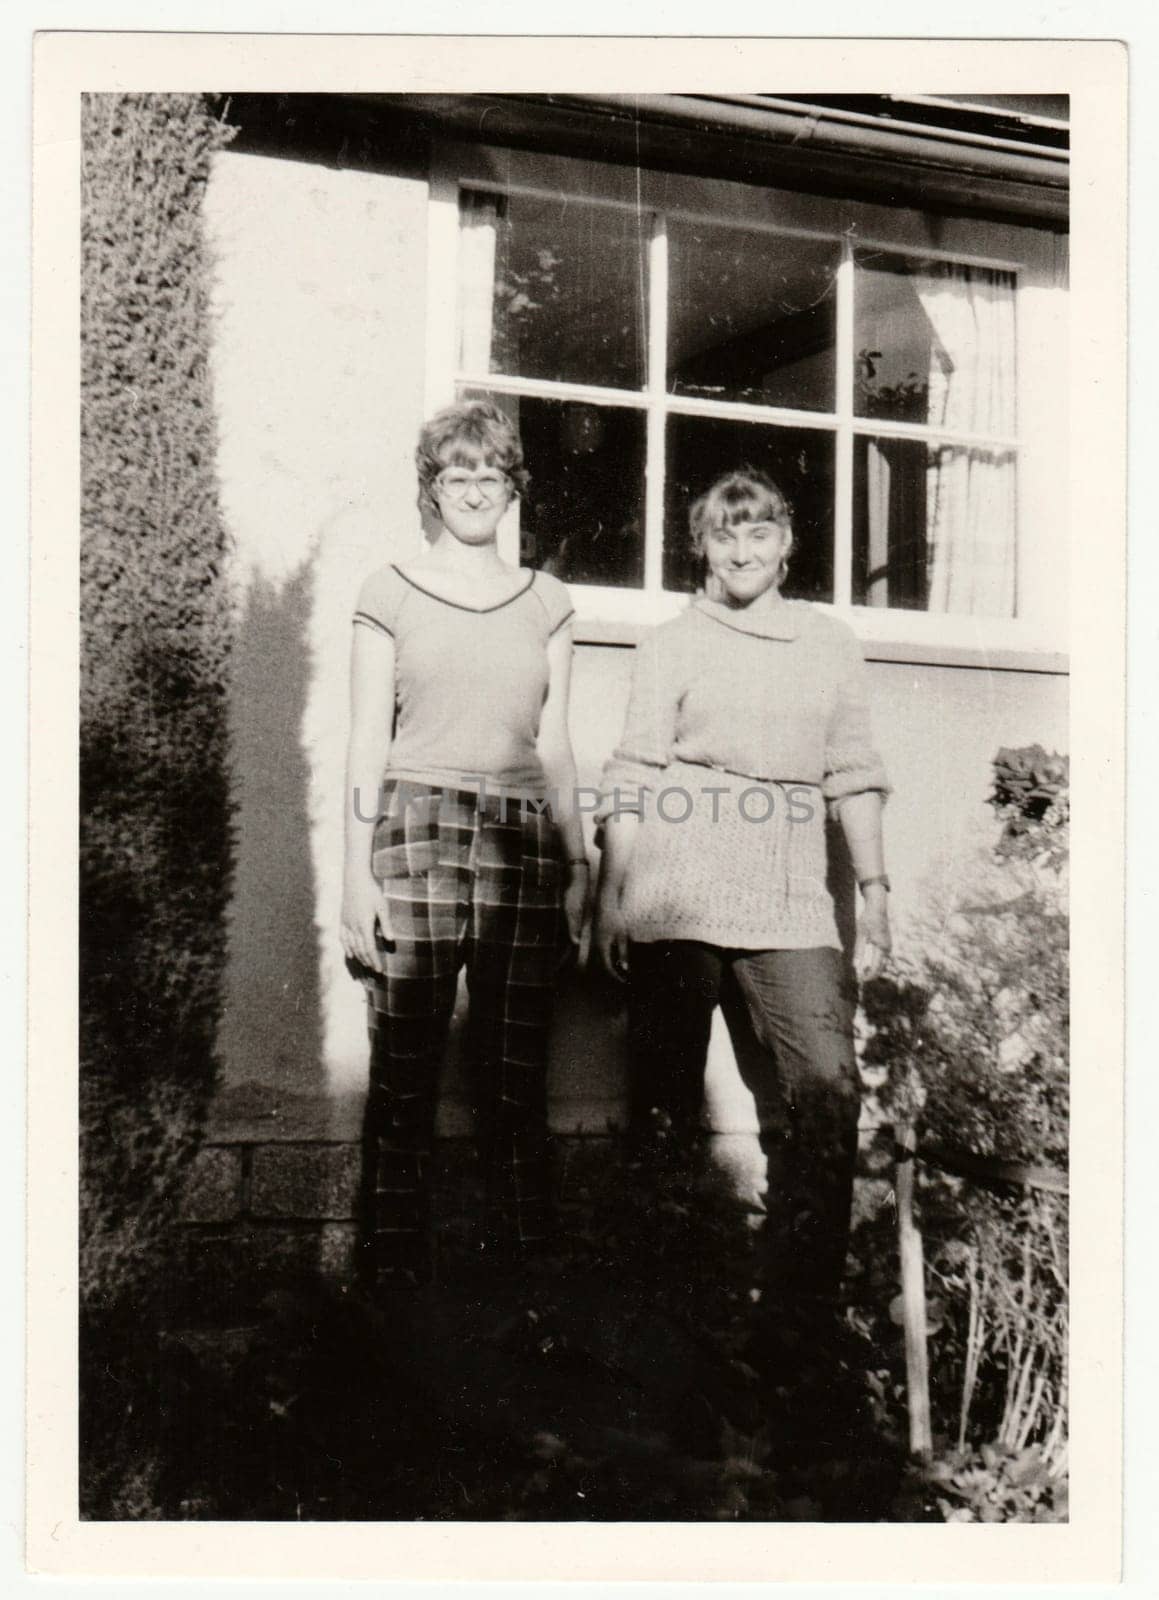 Vintage photo shows young girls in front of country house. Retro black and white photography. by roman_nerud